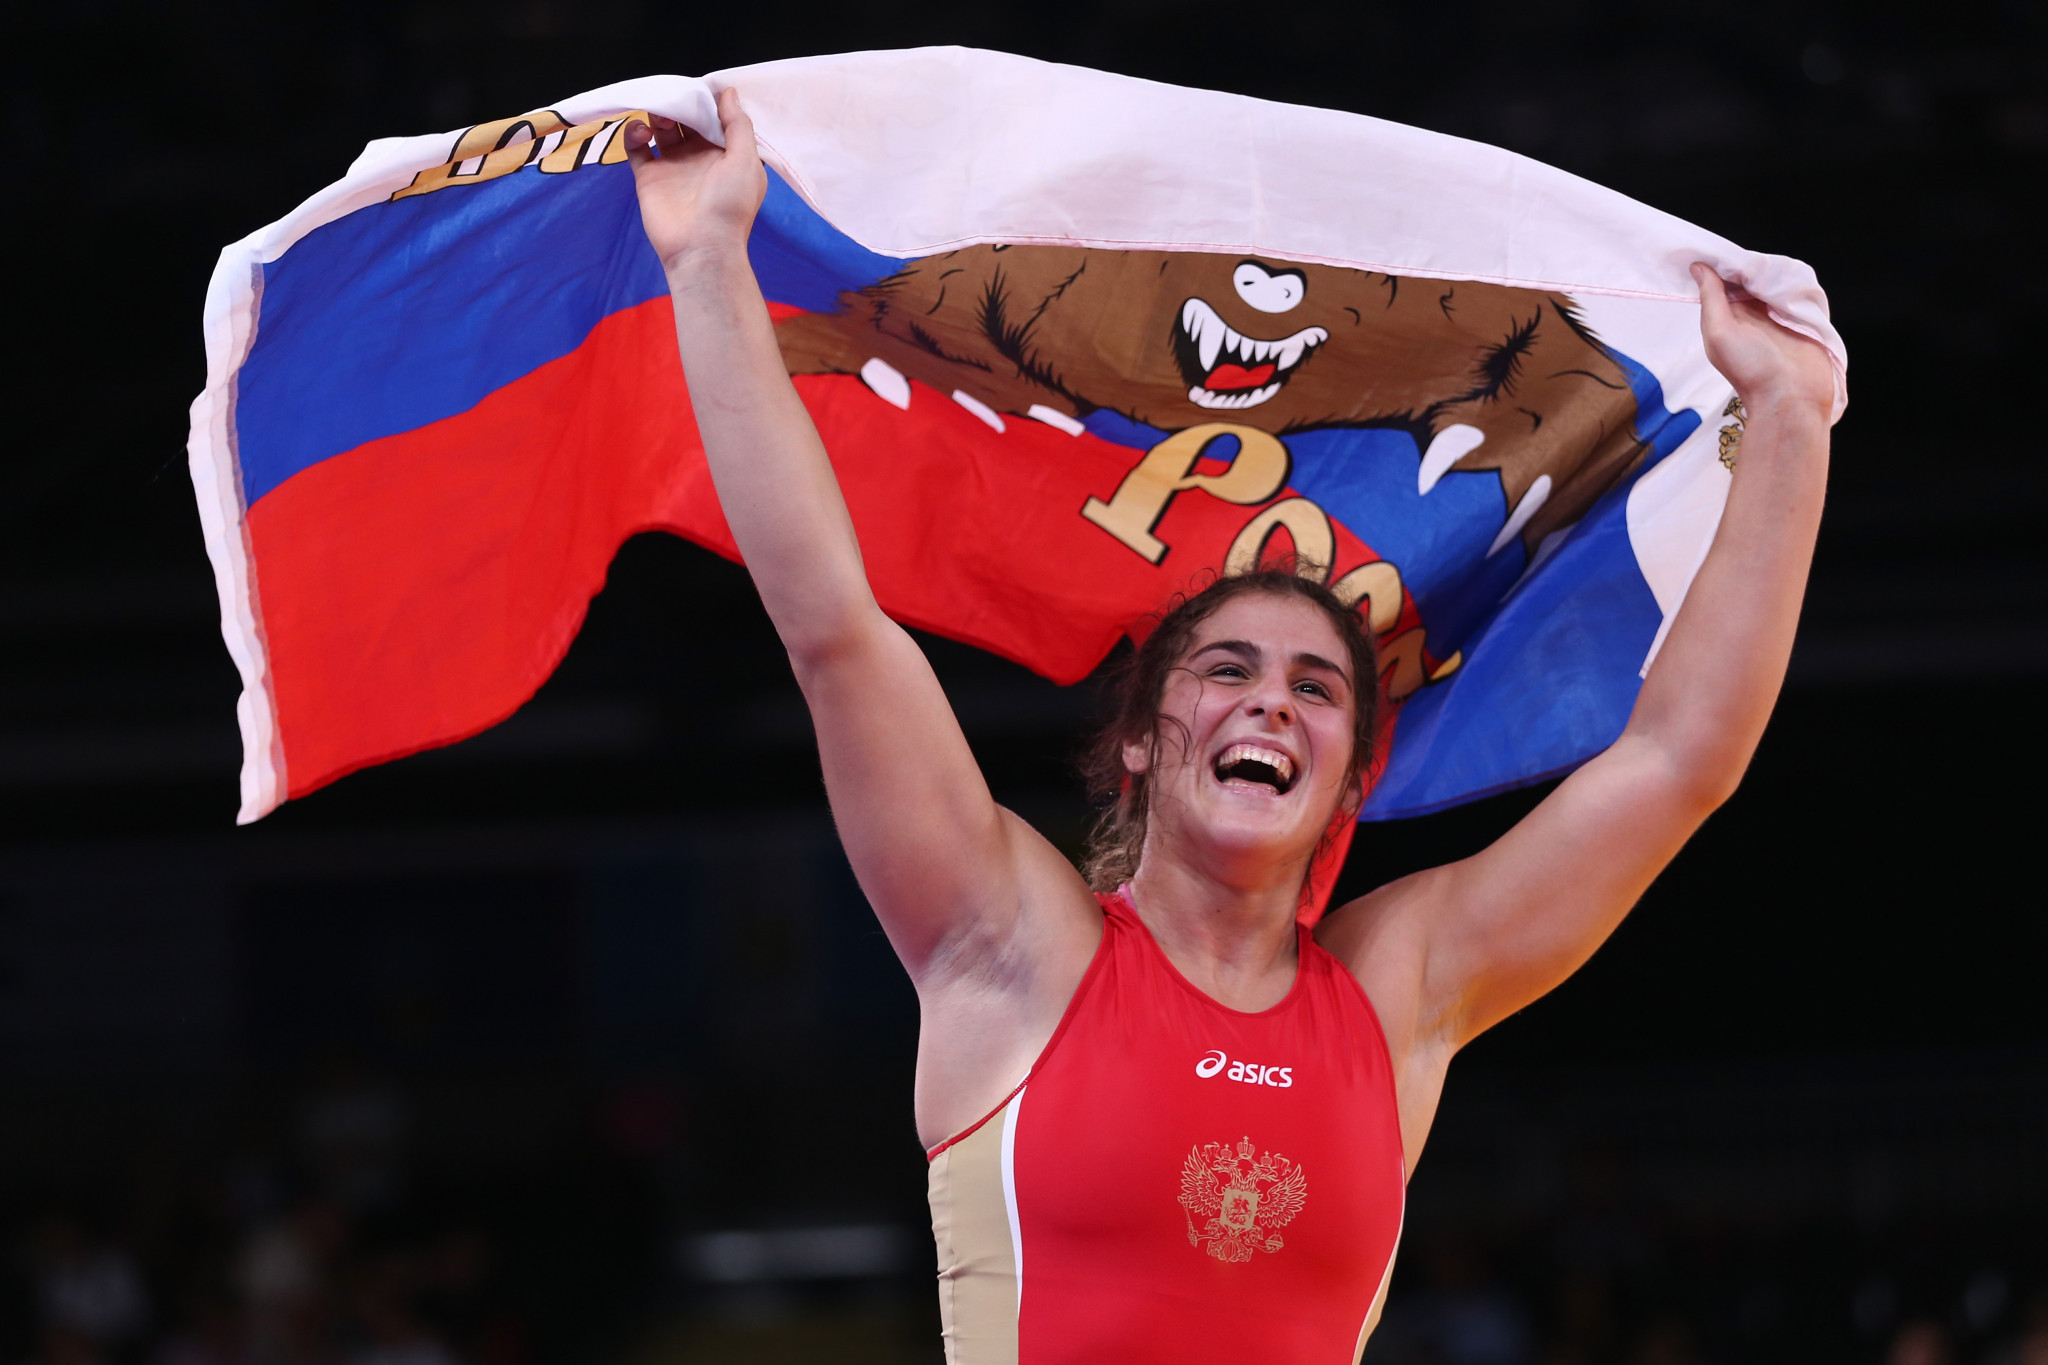 London 2012 champion Natalia Vorobeva of Russia qualified in the women's 76kg category after edging out her opponent Martina Kuenz courtesy of two inactivity calls ©Getty Images